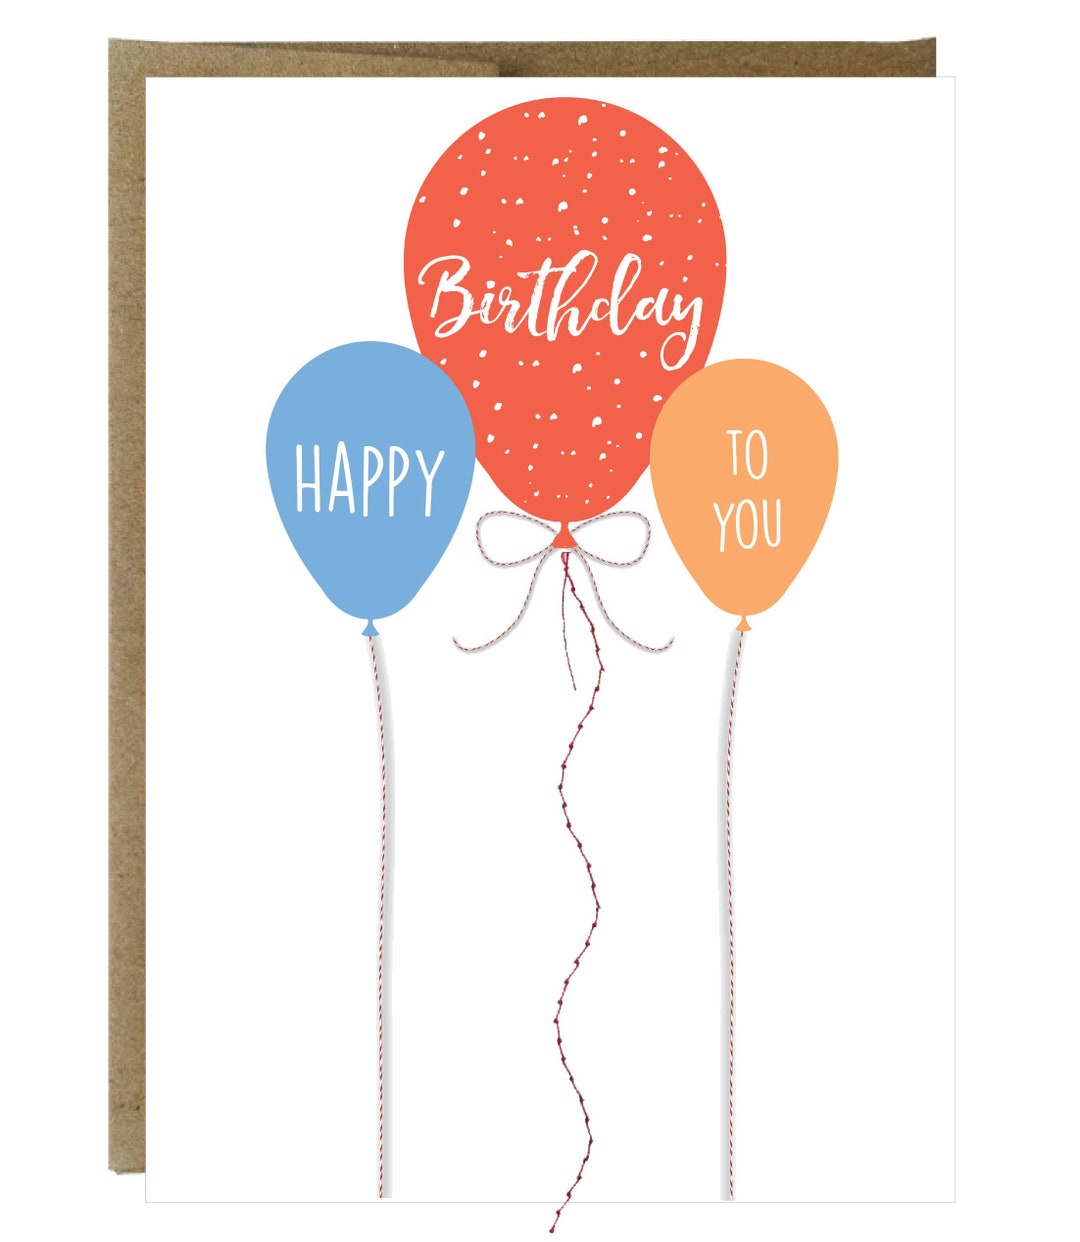 Happy Birthday to You Balloons Card With Sewn Paper - Etsy